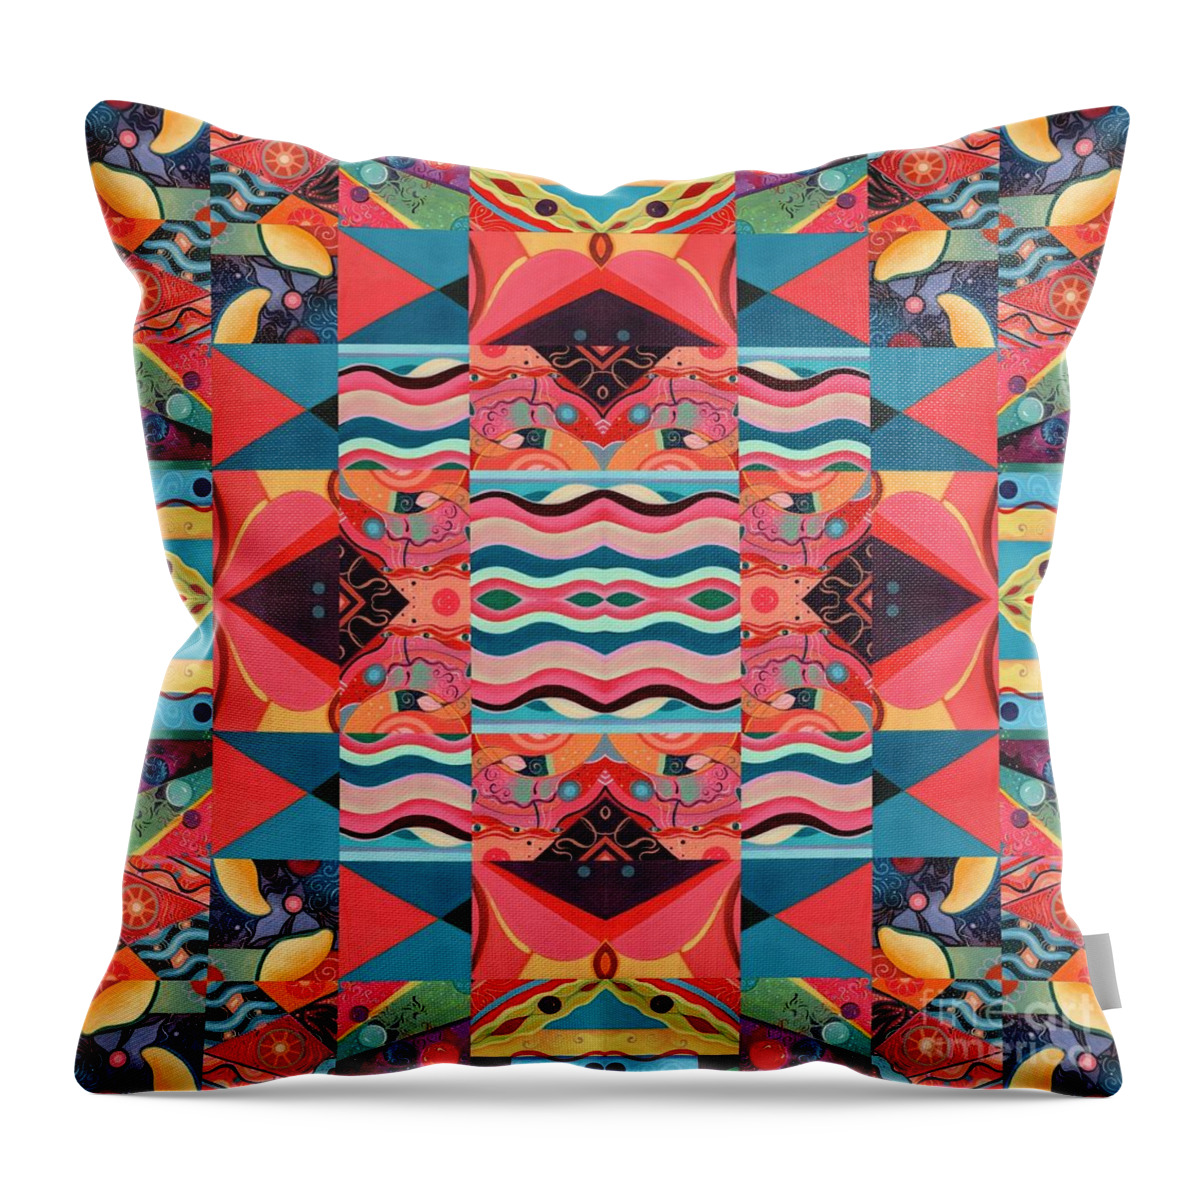 The Joy Of Design Mandala Series Puzzle 8 Arrangement 6 By Helena Tiainen Throw Pillow featuring the painting The Joy of Design Mandala Series Puzzle 8 Arrangement 6 by Helena Tiainen